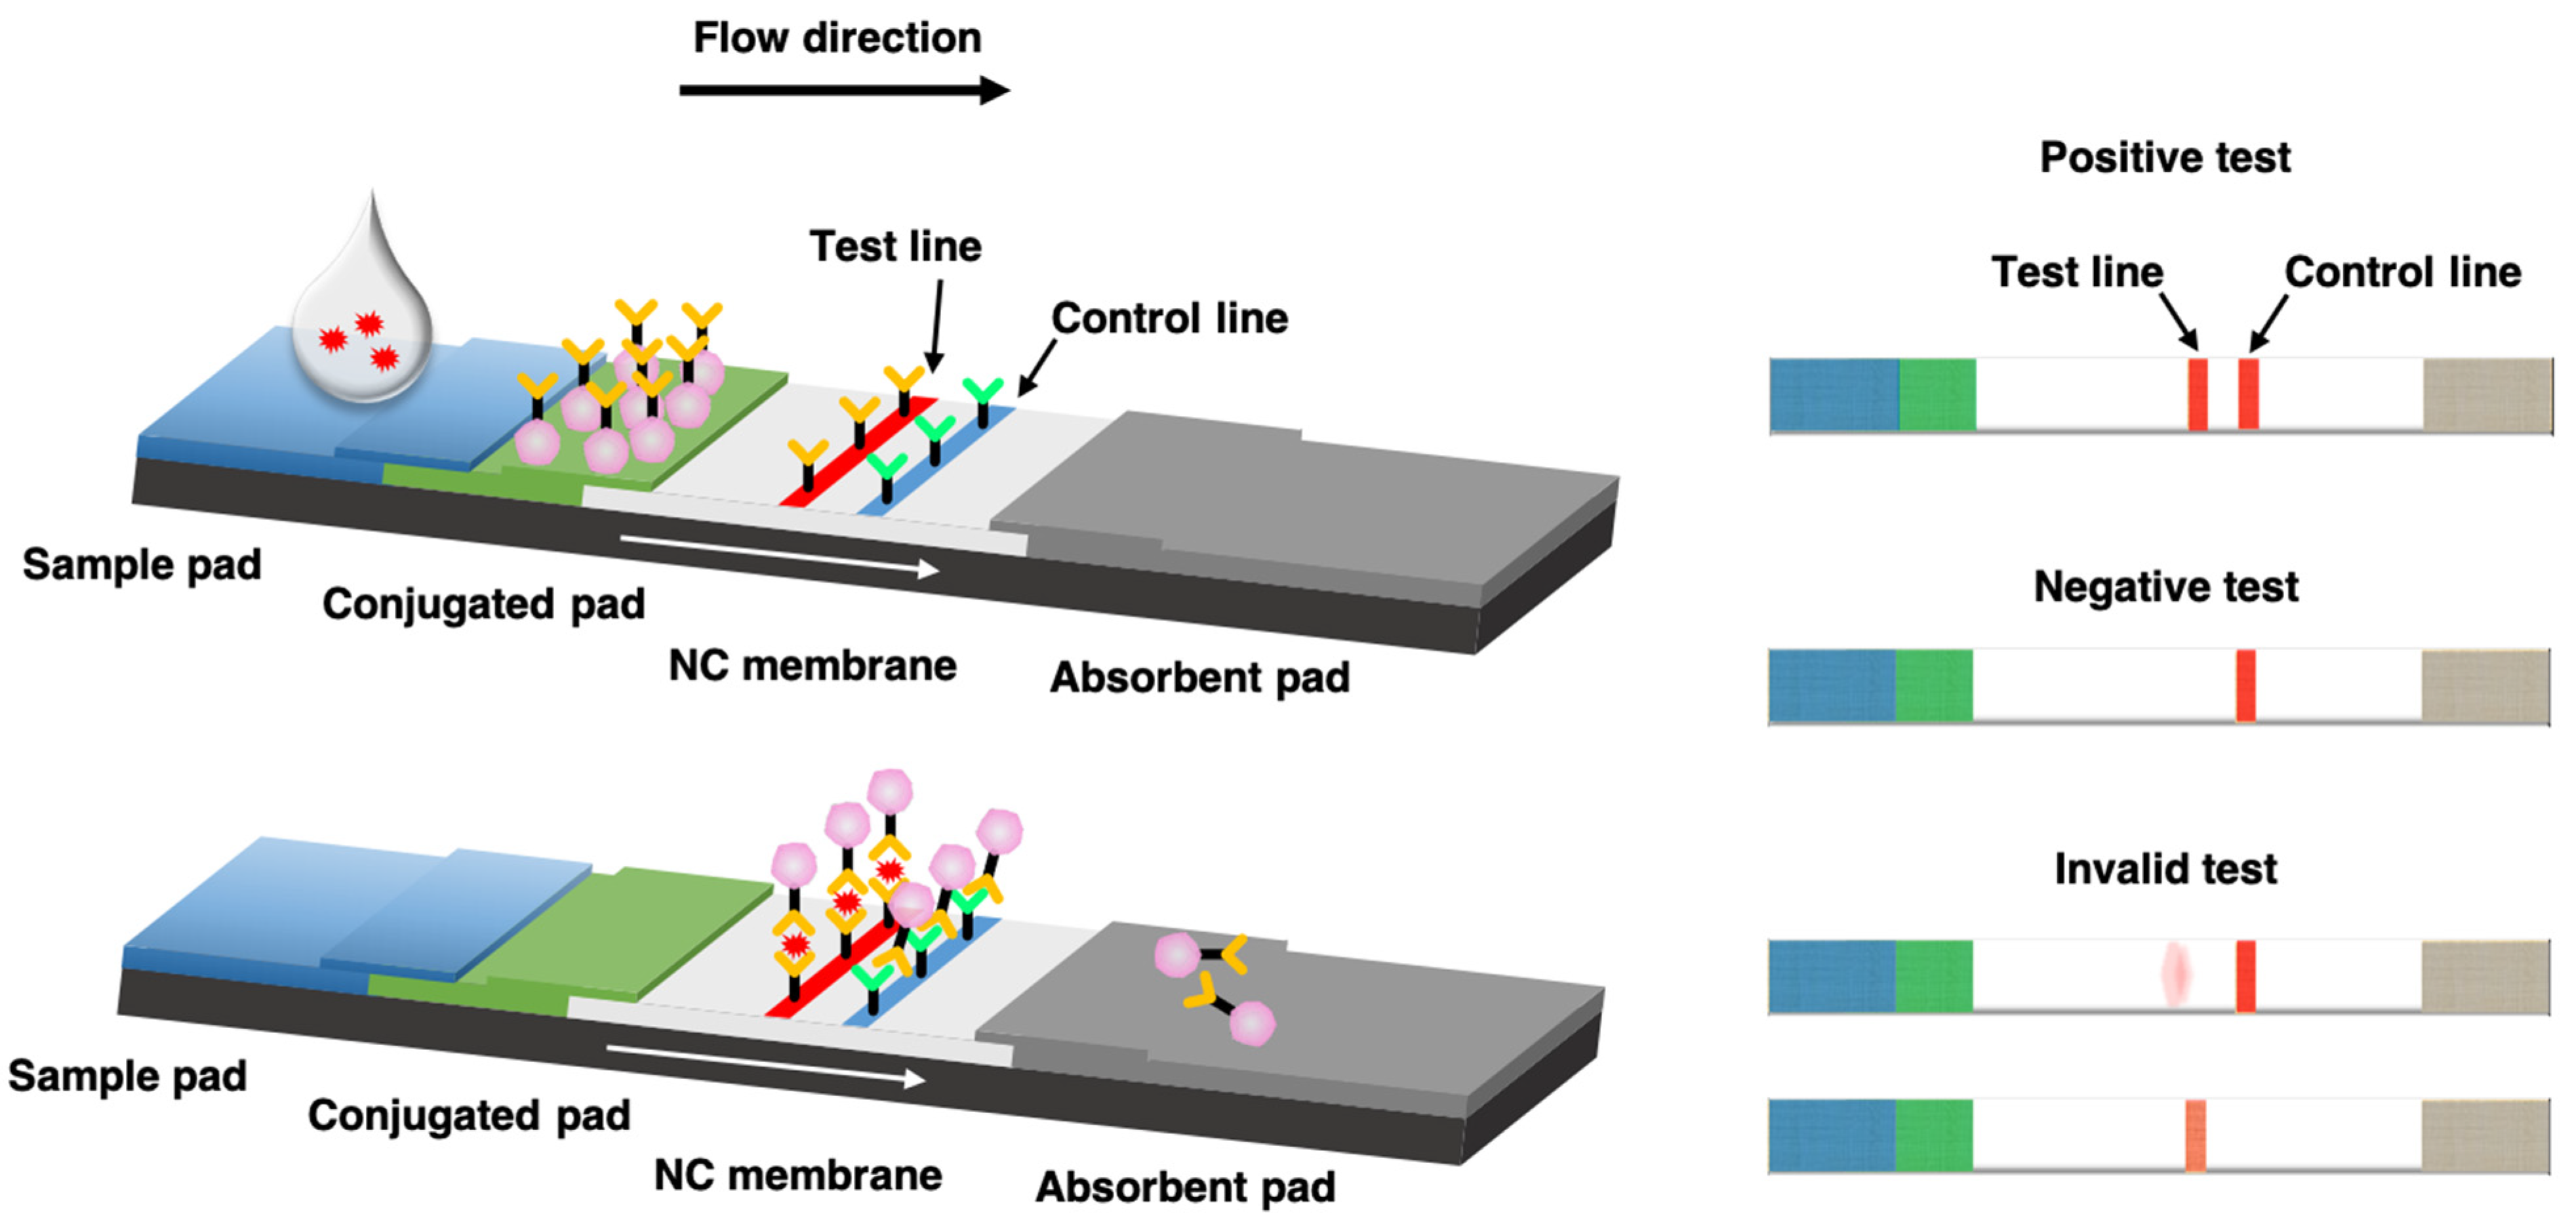 Rapid One-Pot Detection of SARS-CoV-2 Based on a Lateral Flow